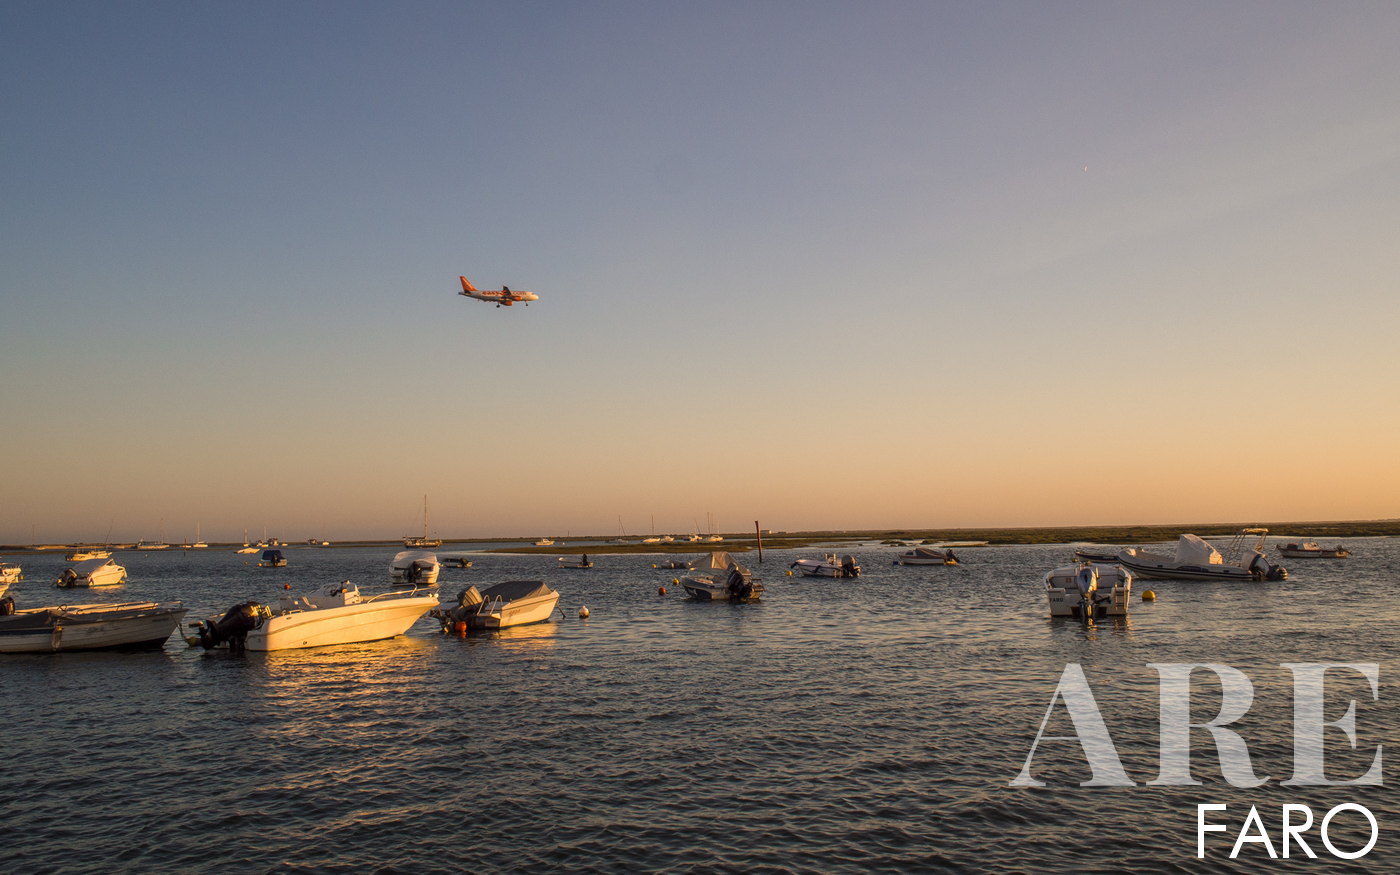 View of an airplane approaching Faro International Airport, showcasing the stunning natural beauty of Ria Formosa below